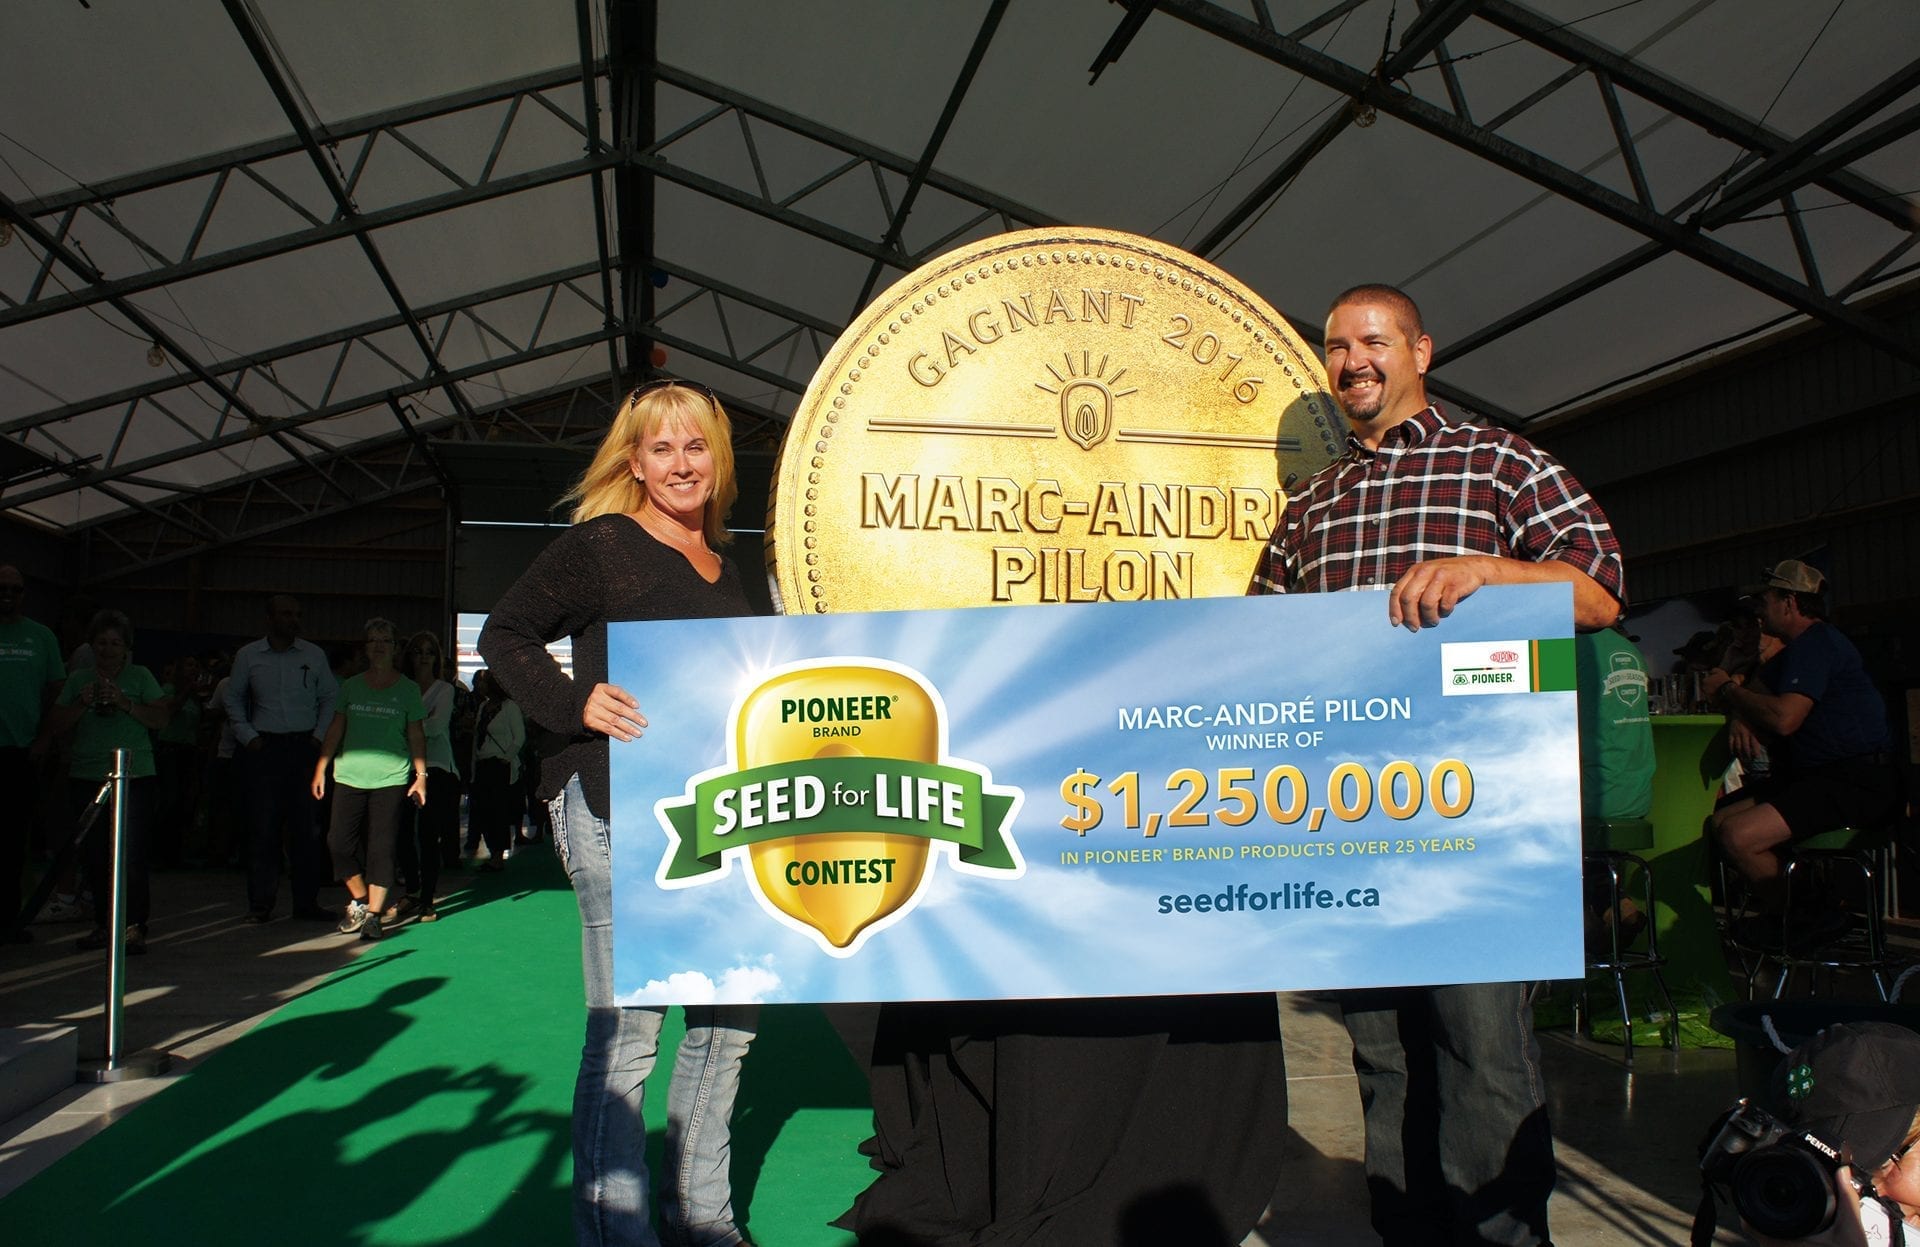 DuPont Pioneer Seed for Life grand prize winner coin and banner